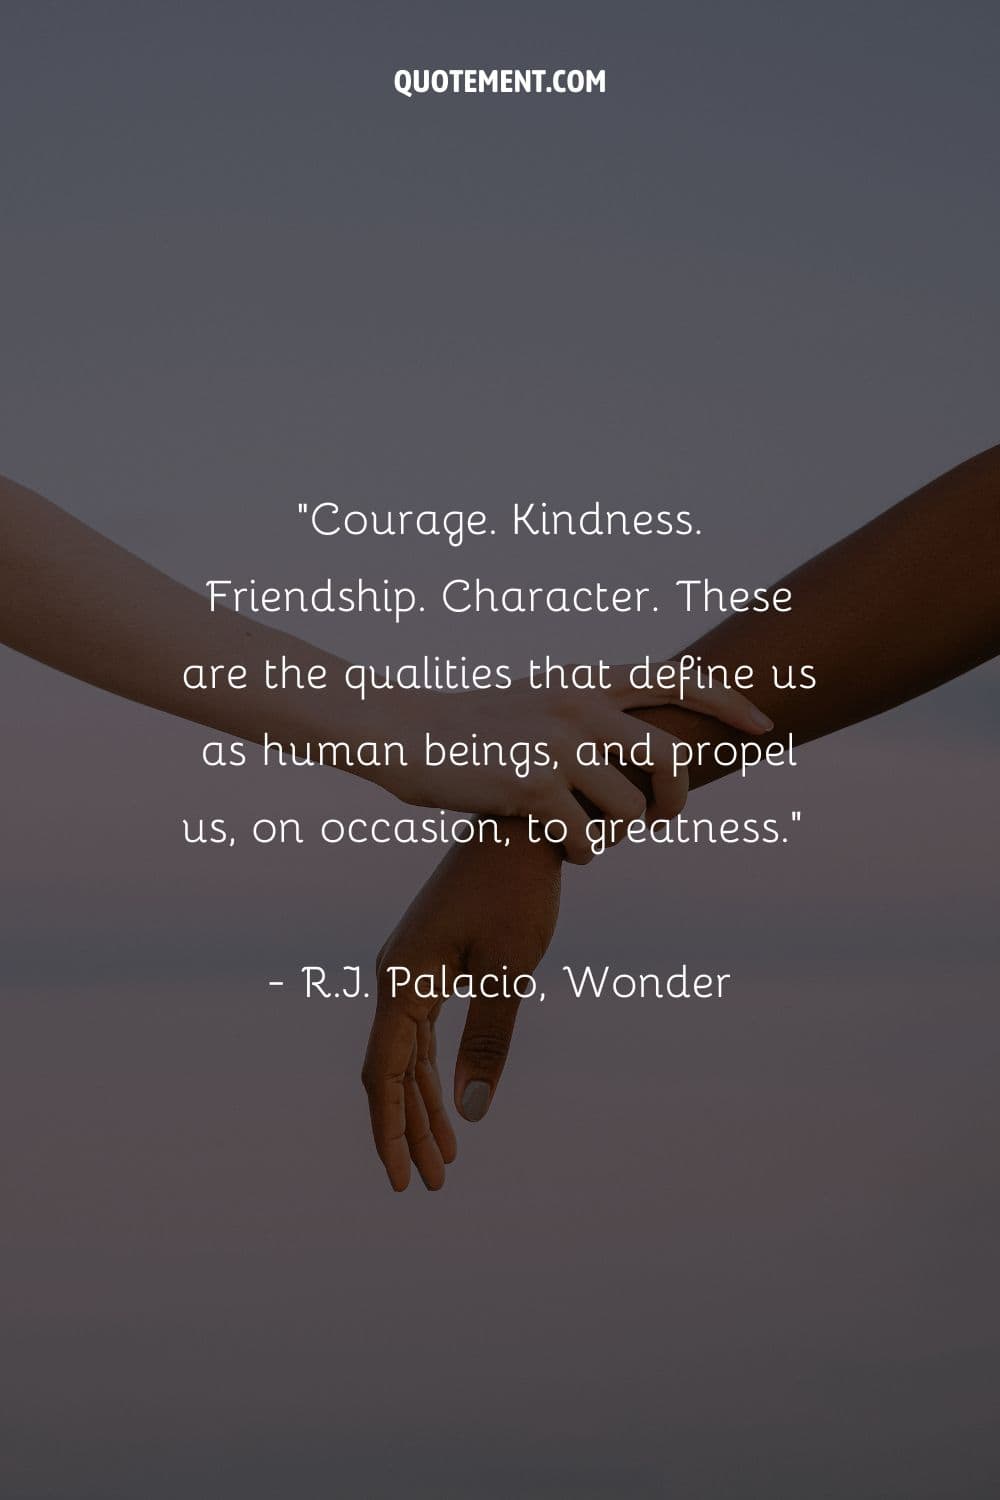 Courage. Kindness. Friendship. Character. These are the qualities that define us as human beings, and propel us, on occasion, to greatness